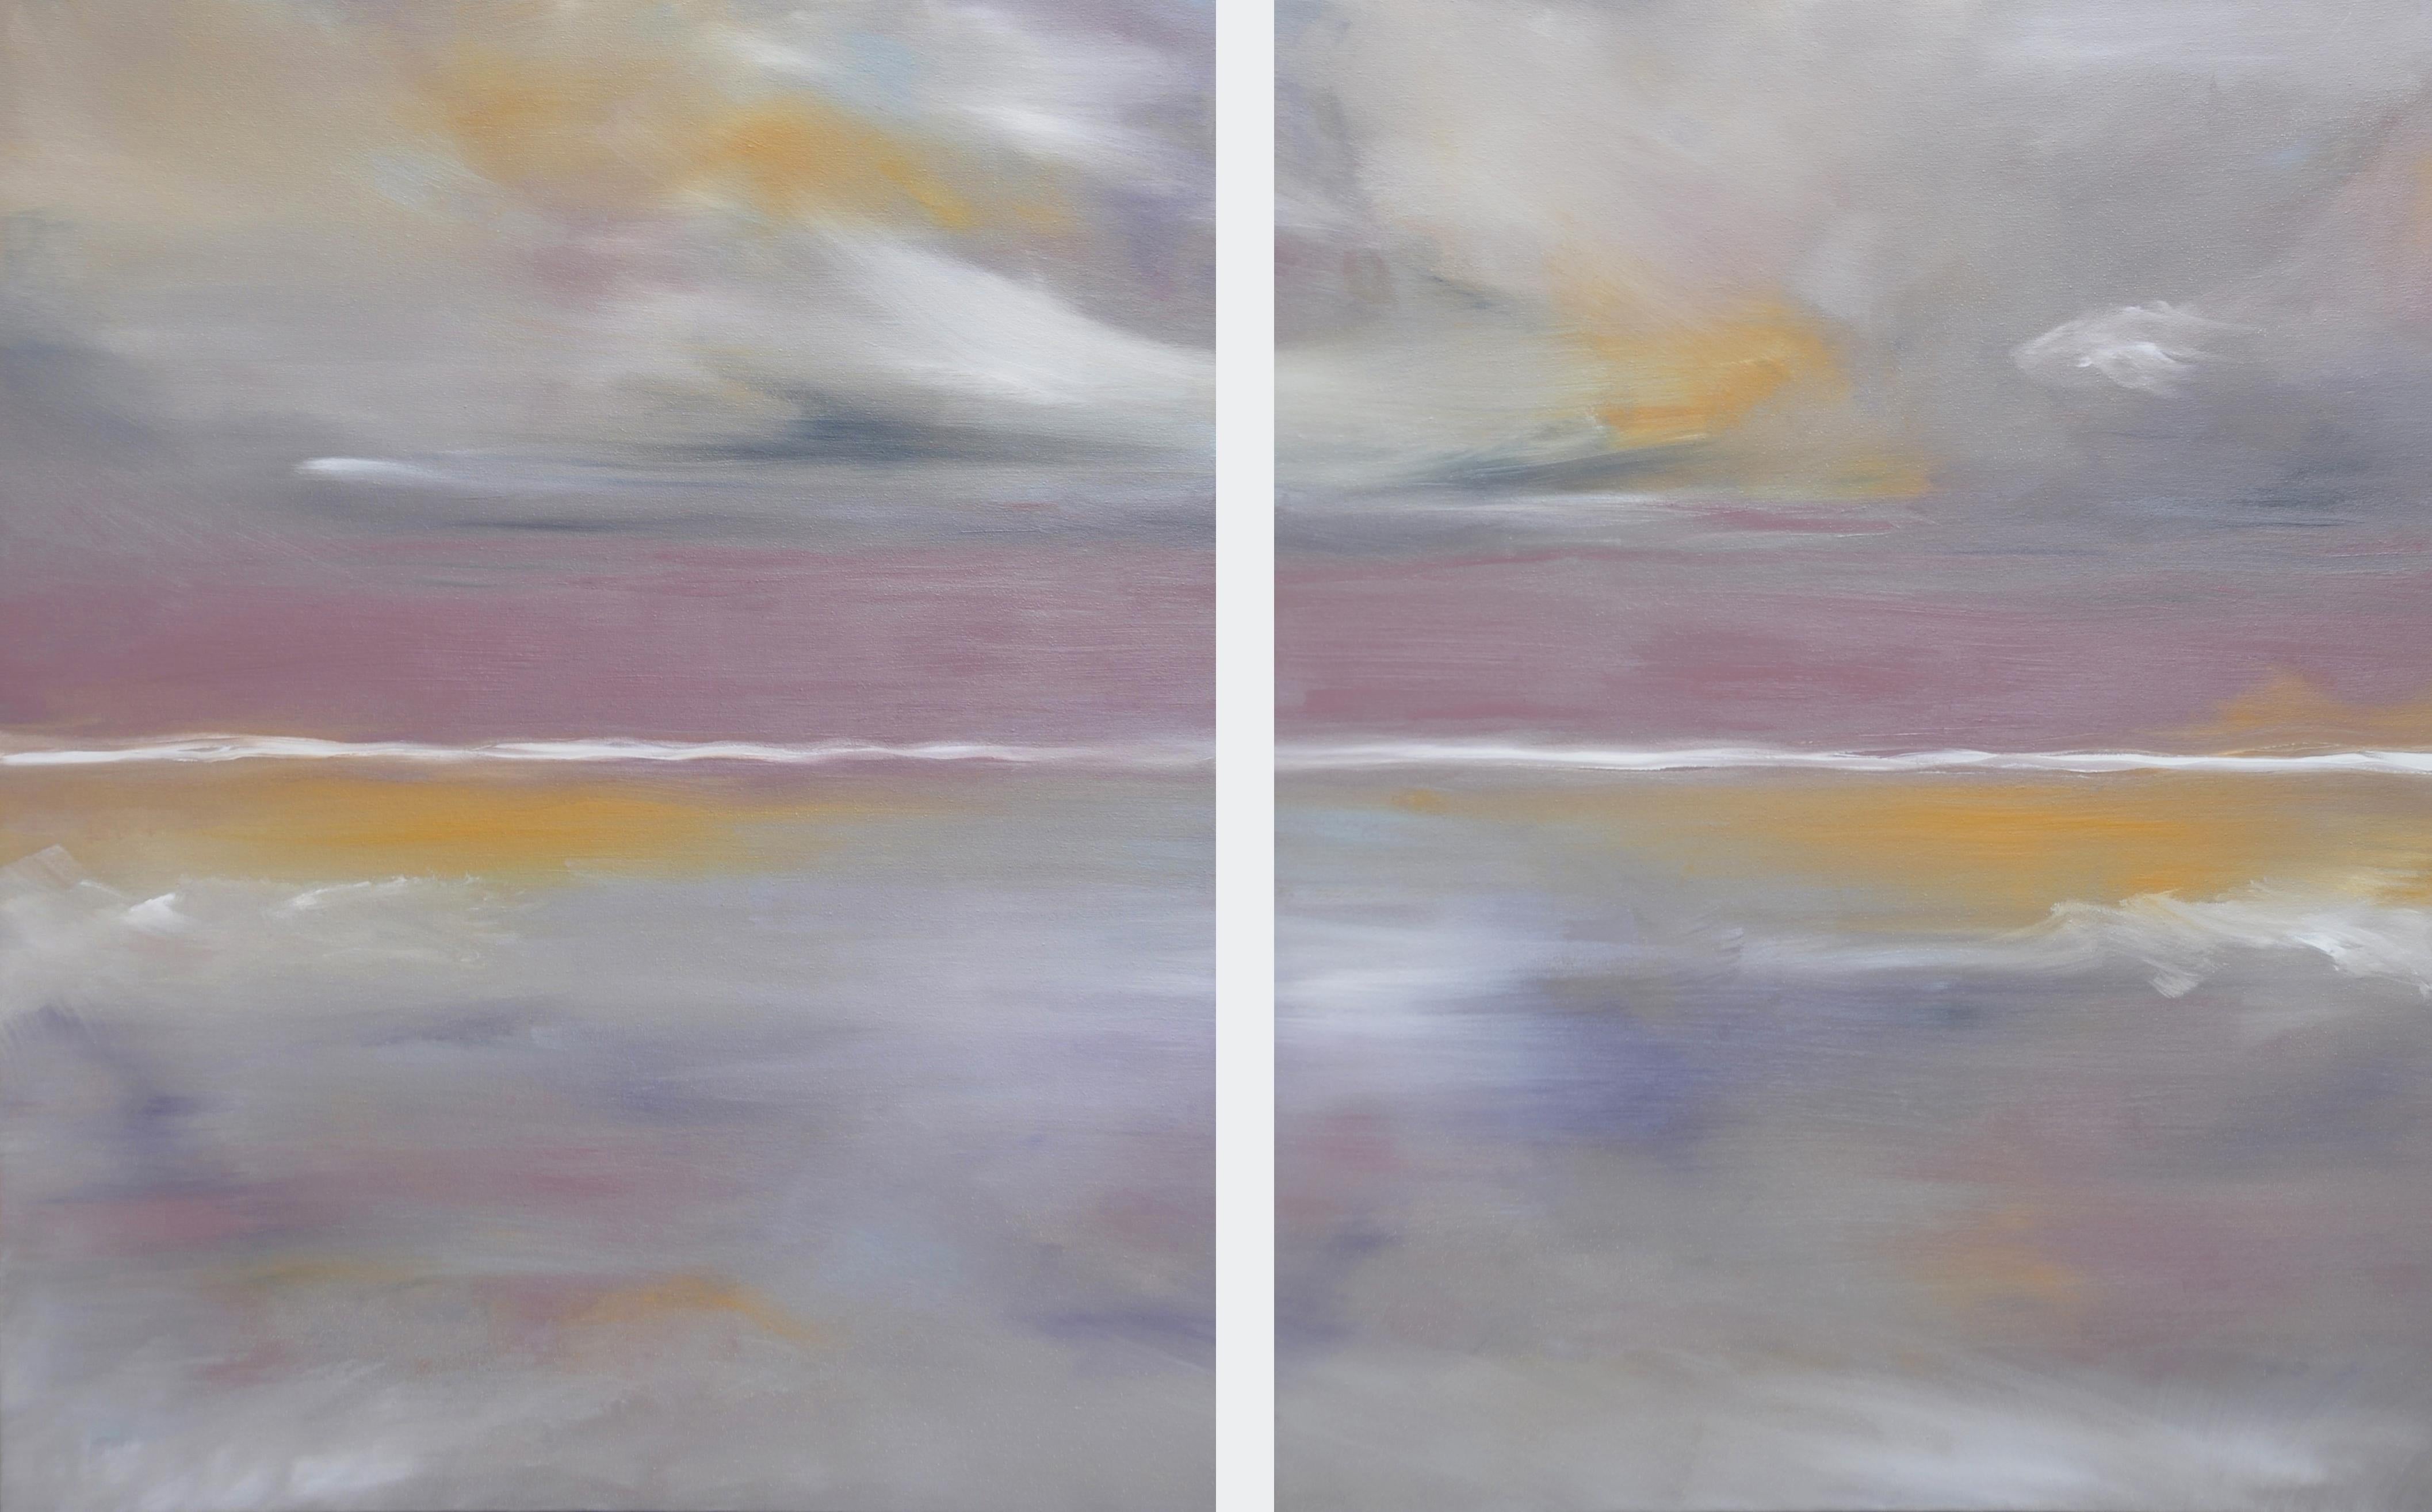 Poetic Art Statement: Days of Halcyon - All is Well. Halcyon II (Diptych) expresses whatever the viewer decides. With no separation, these modern-abstract contemporary paintings equal 48" w x 30" h. They may be separated by 1-3" depending on the